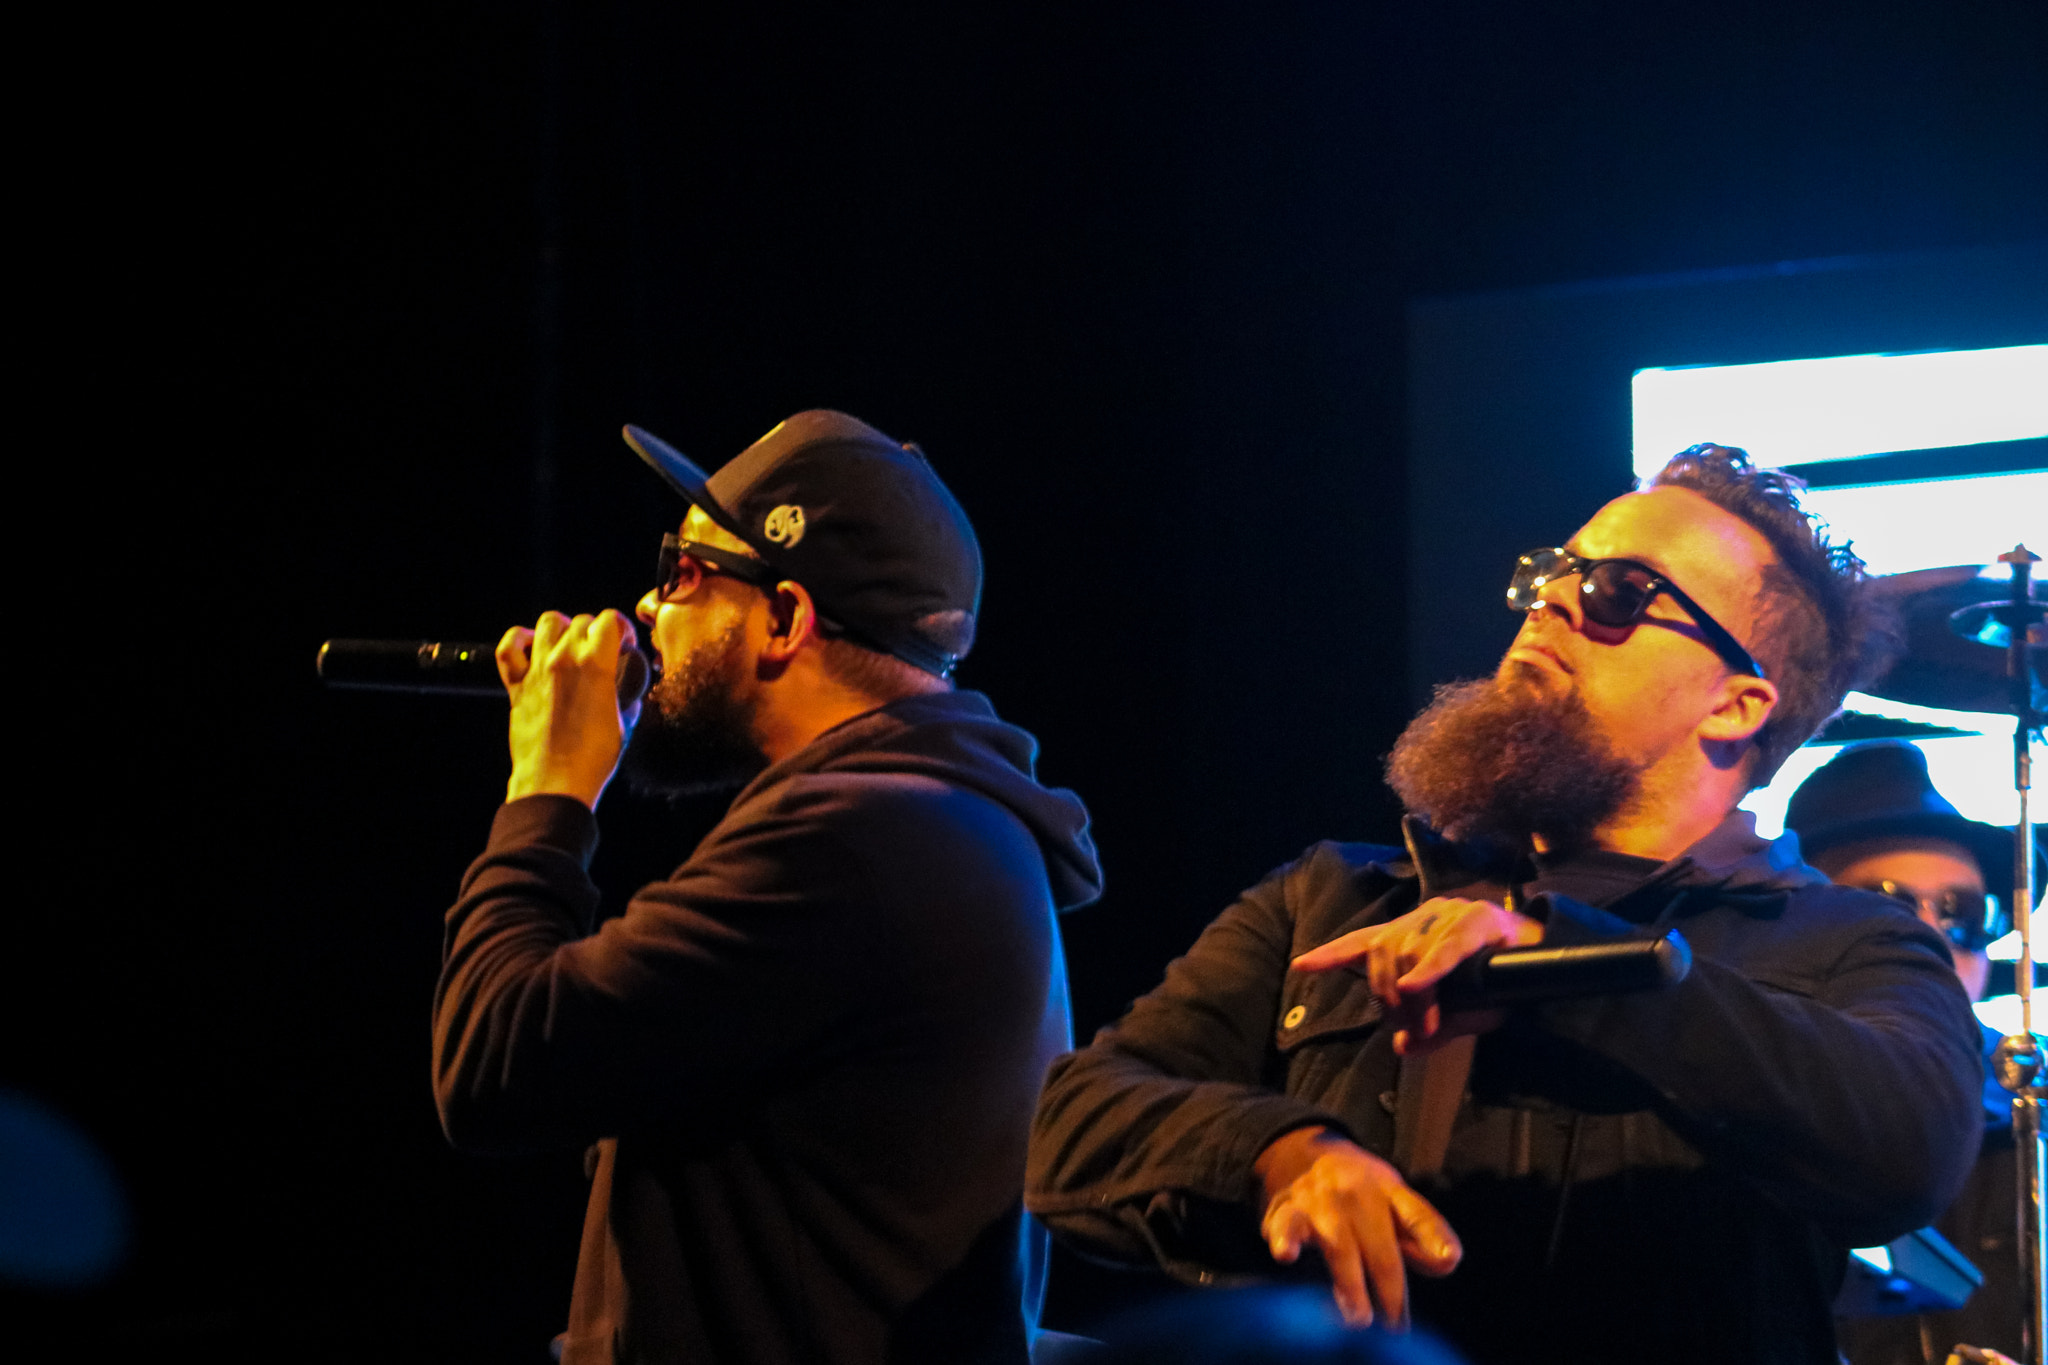 Canon EOS 750D (EOS Rebel T6i / EOS Kiss X8i) sample photo. Rap group ¡mayday! opened for common kings at the grenada on friday, feb 24. photography